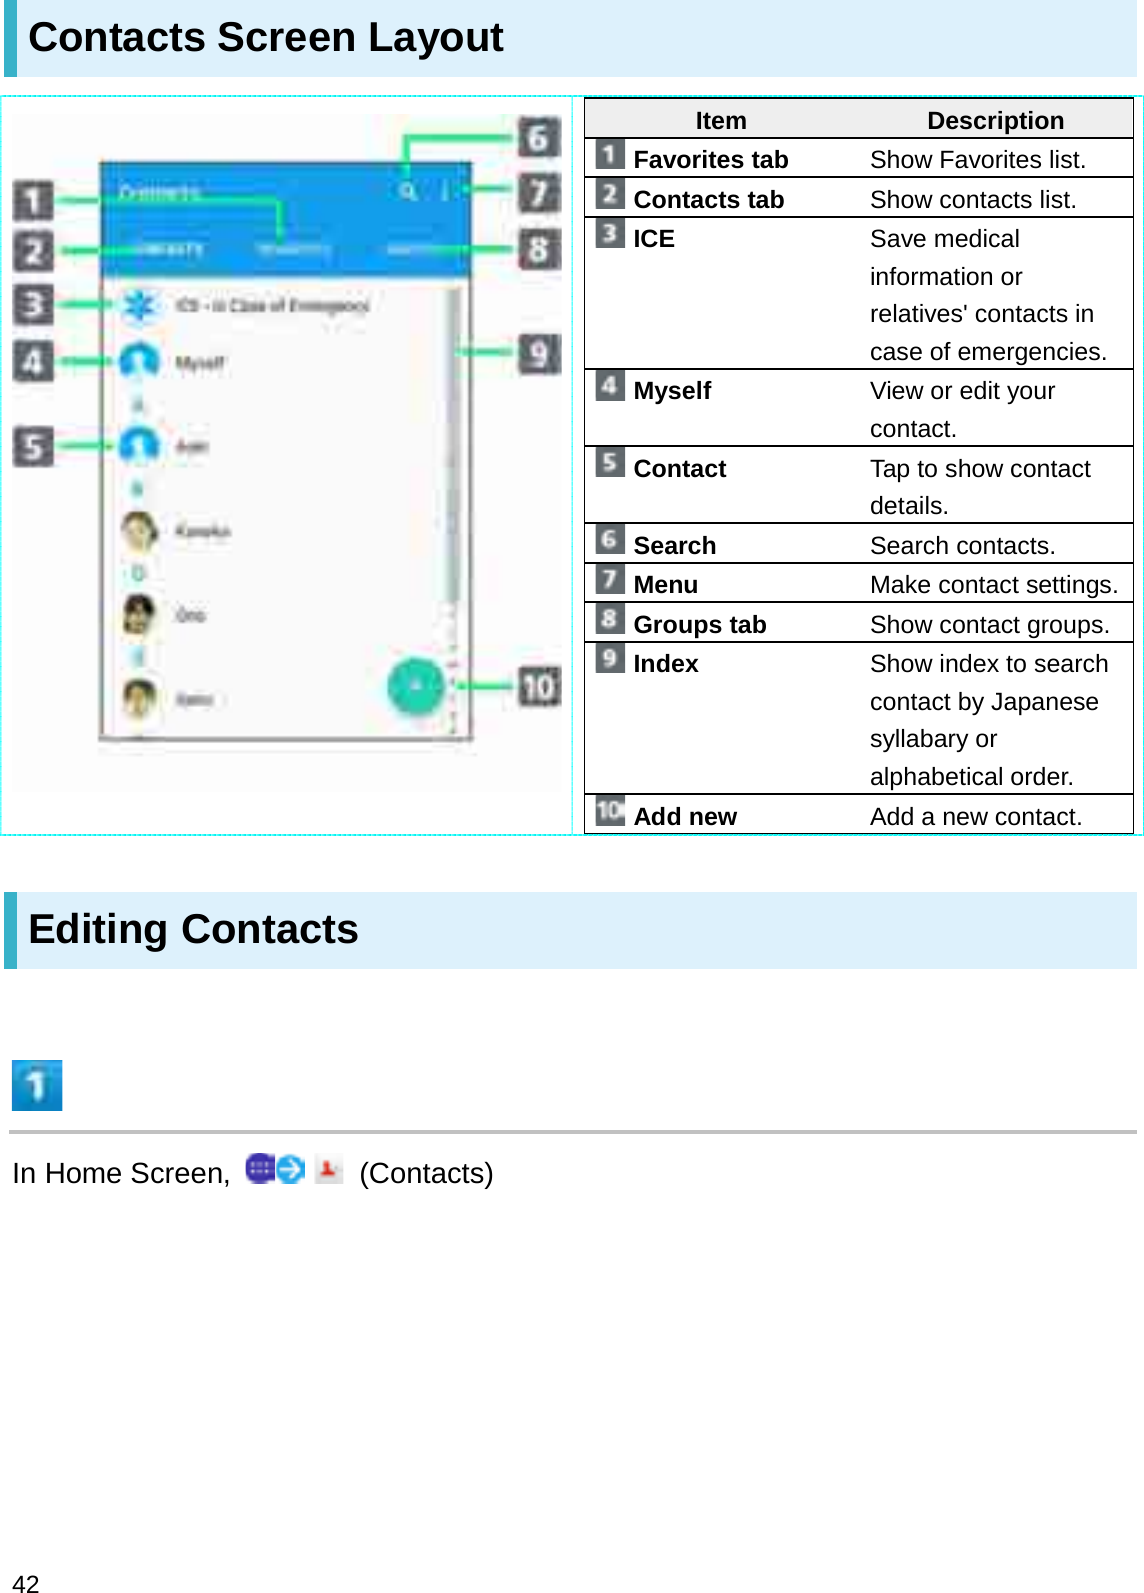 Contacts Screen LayoutItem DescriptionFavorites tab Show Favorites list.Contacts tab Show contacts list.ICE Save medical information or relatives&apos; contacts in case of emergencies.Myself View or edit your contact.Contact Tap to show contact details.Search Search contacts.Menu Make contact settings.Groups tab Show contact groups.Index Show index to search contact by Japanesesyllabary or alphabetical order.Add new Add a new contact.Editing ContactsIn Home Screen,  (Contacts)42